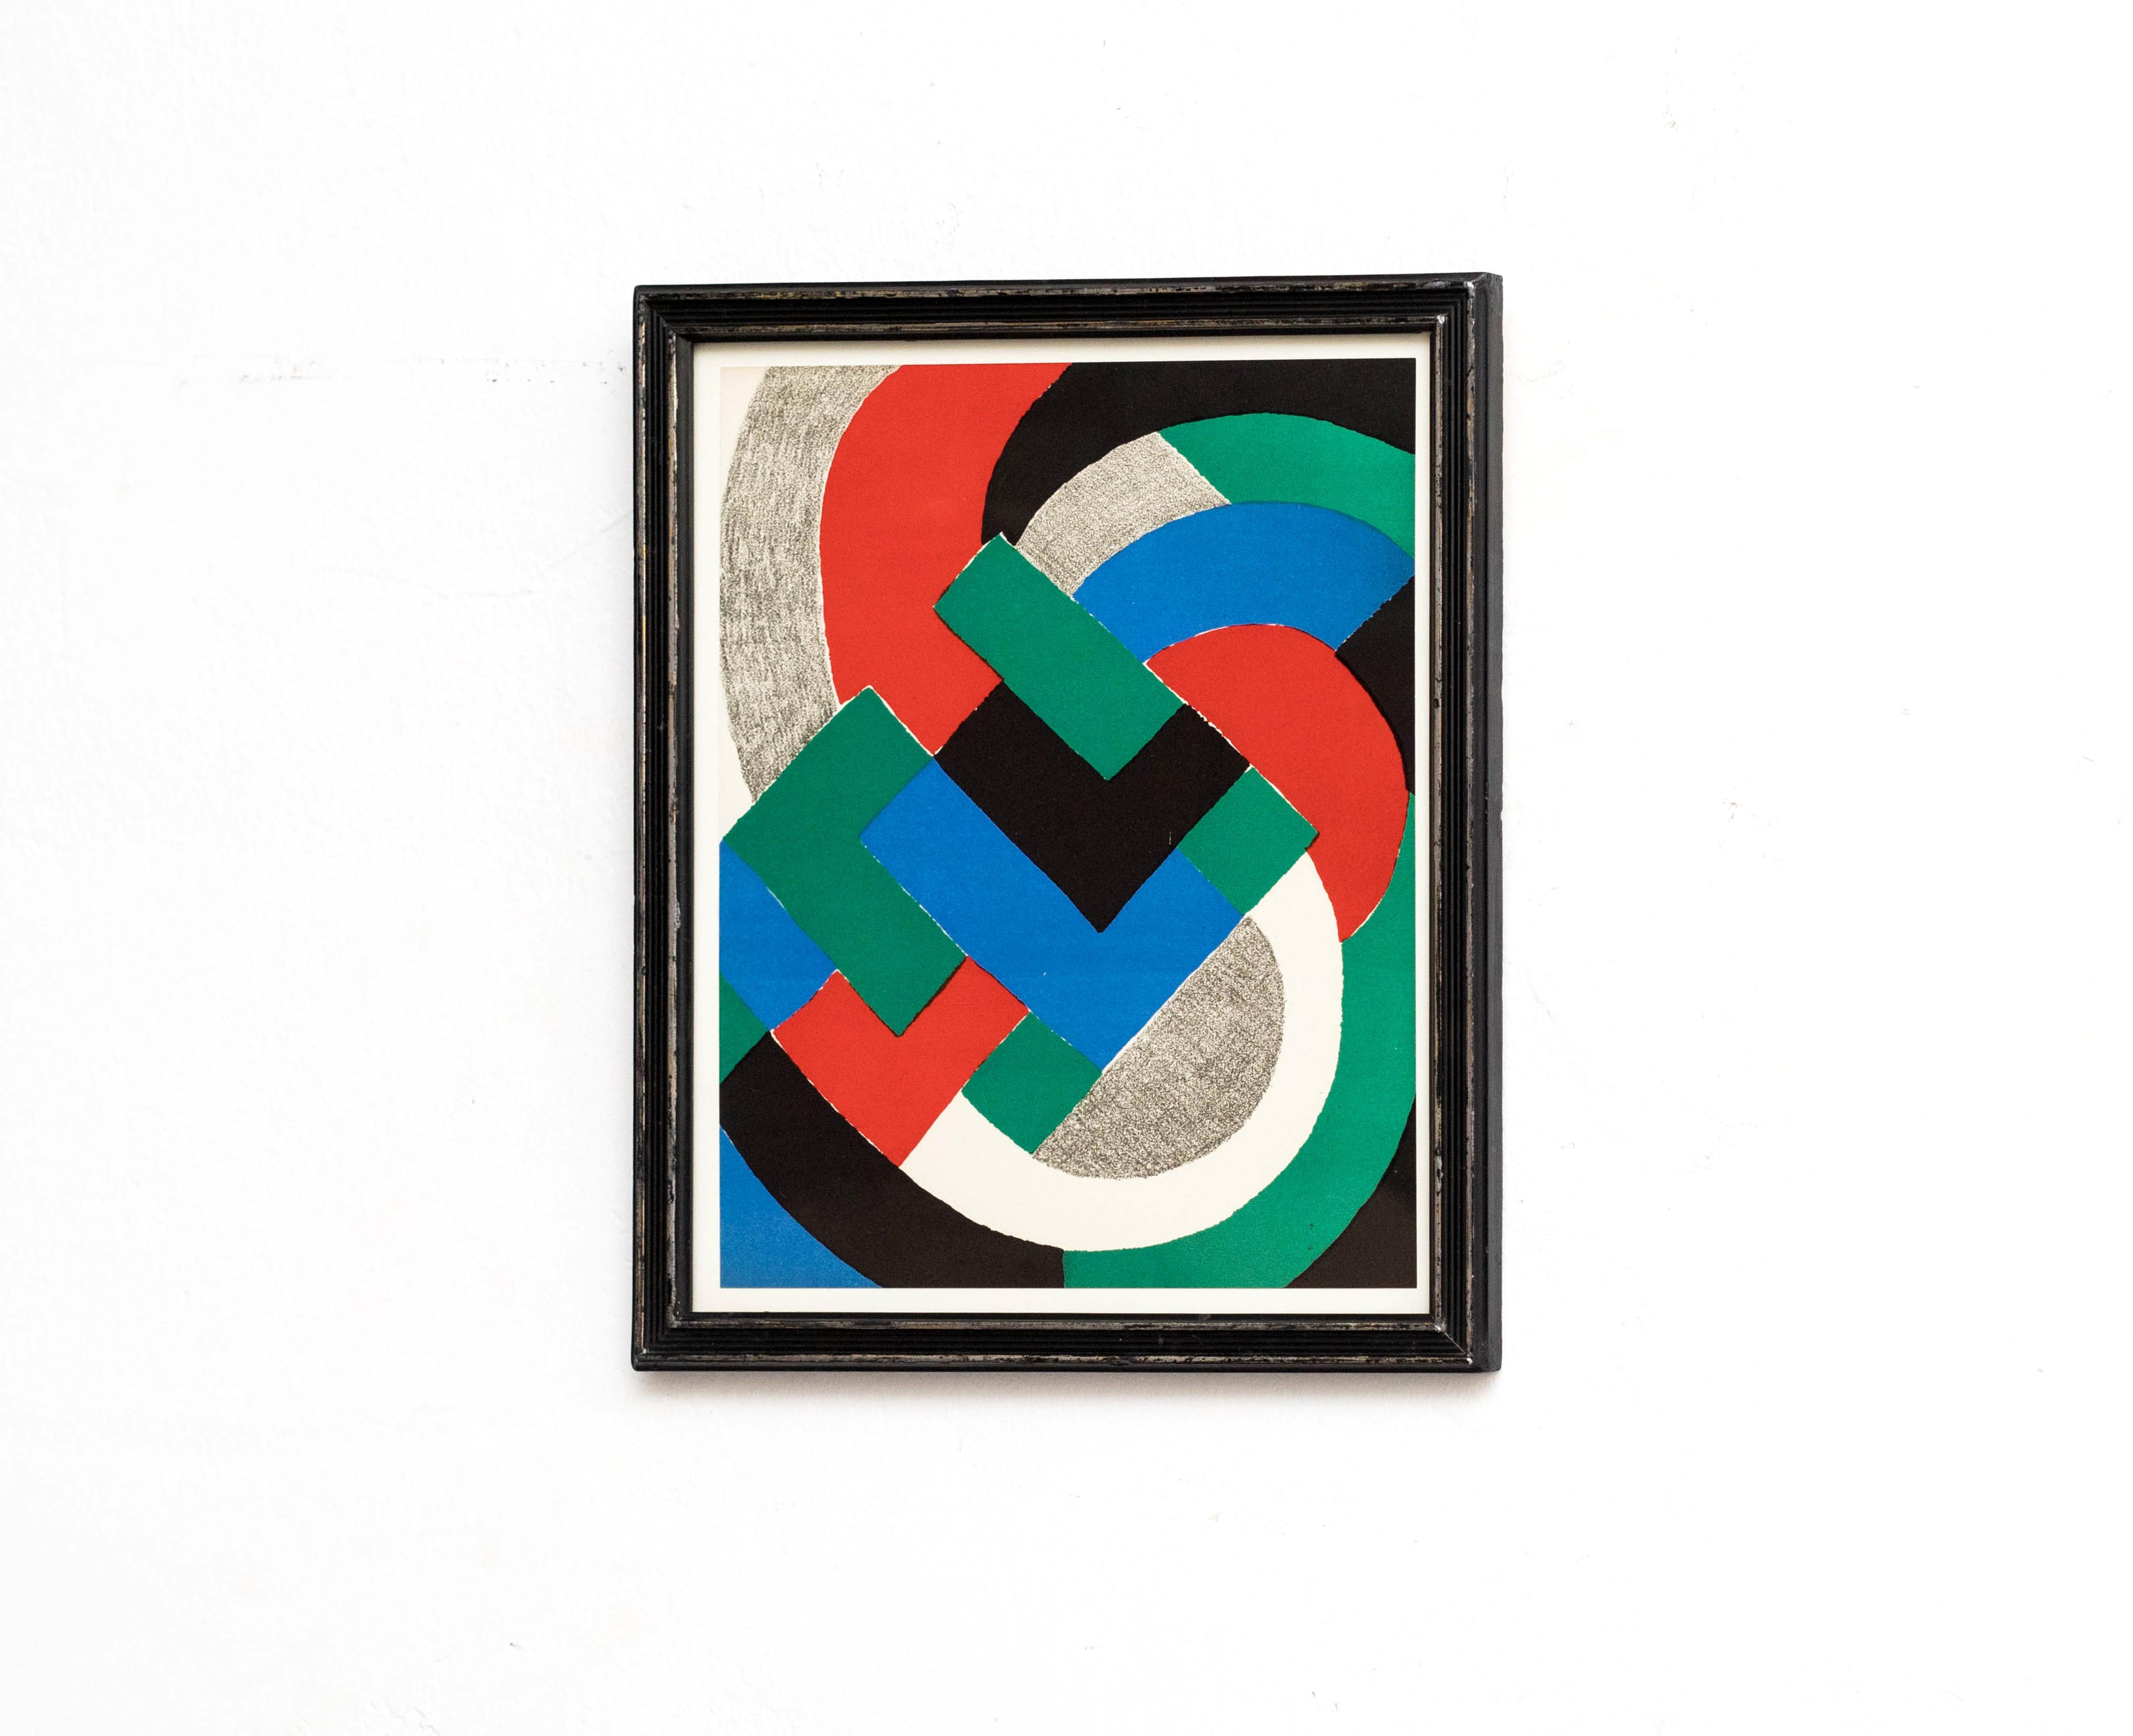 Contemporary Sonia Delaunay Lithography